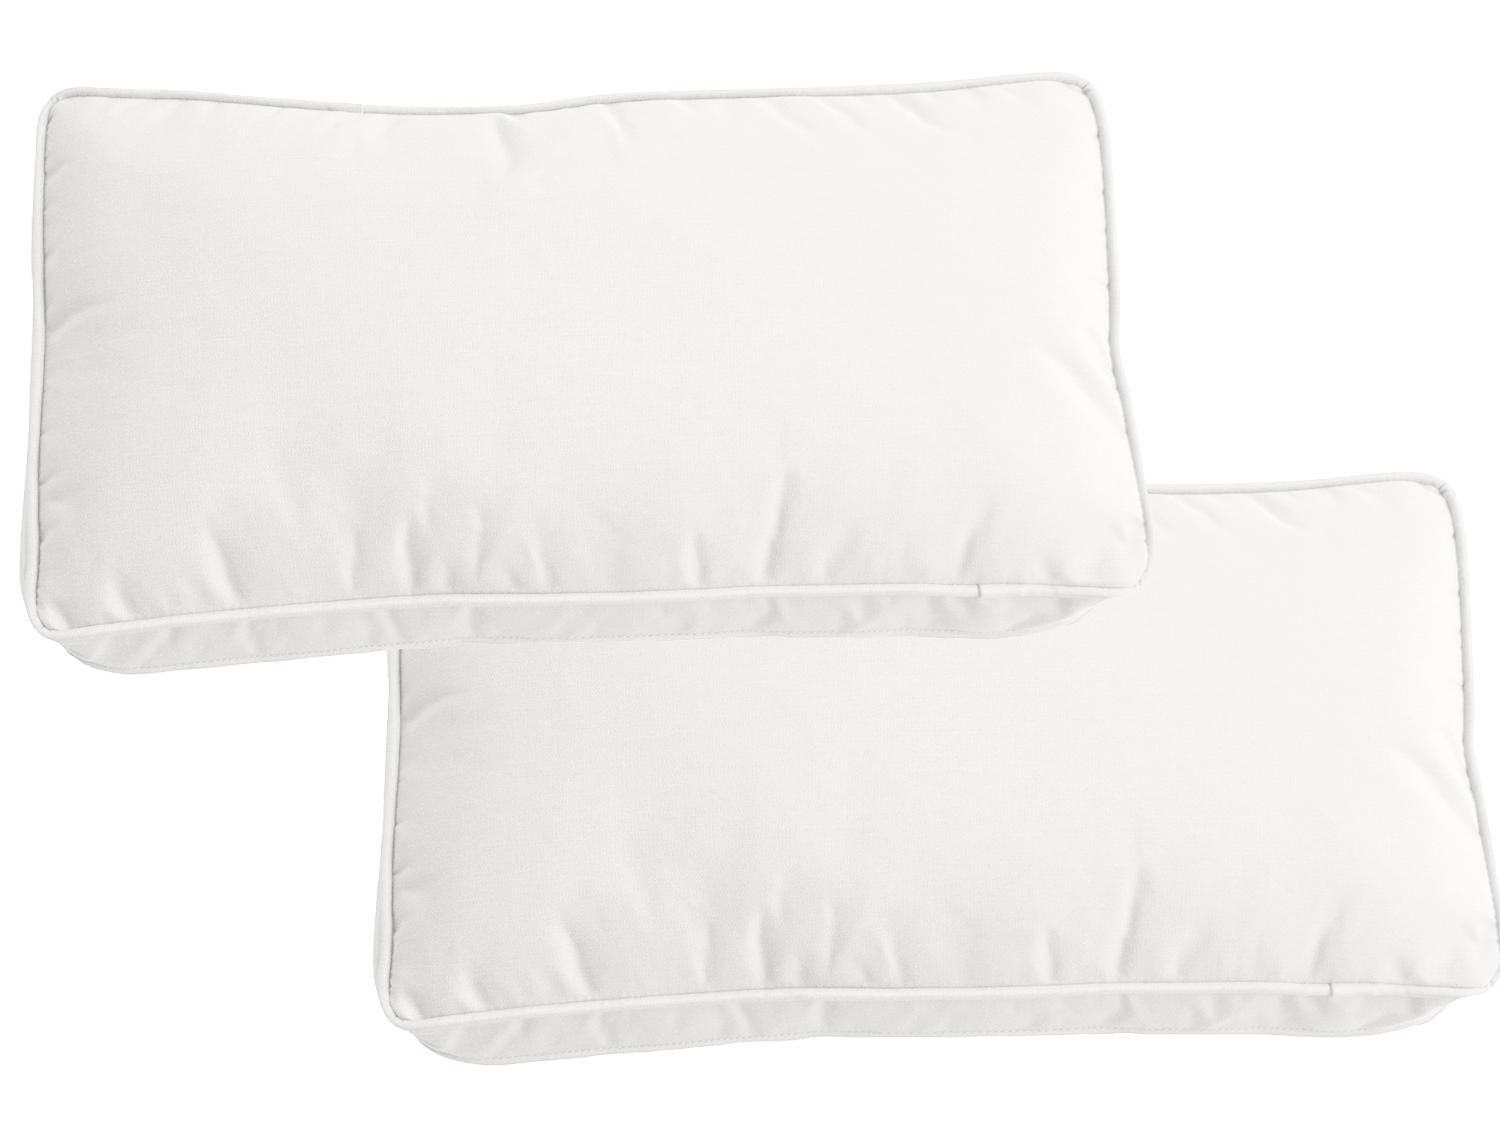 Alexander Francis Garden Furniture Milano Set of 7 White Scatter Cushions